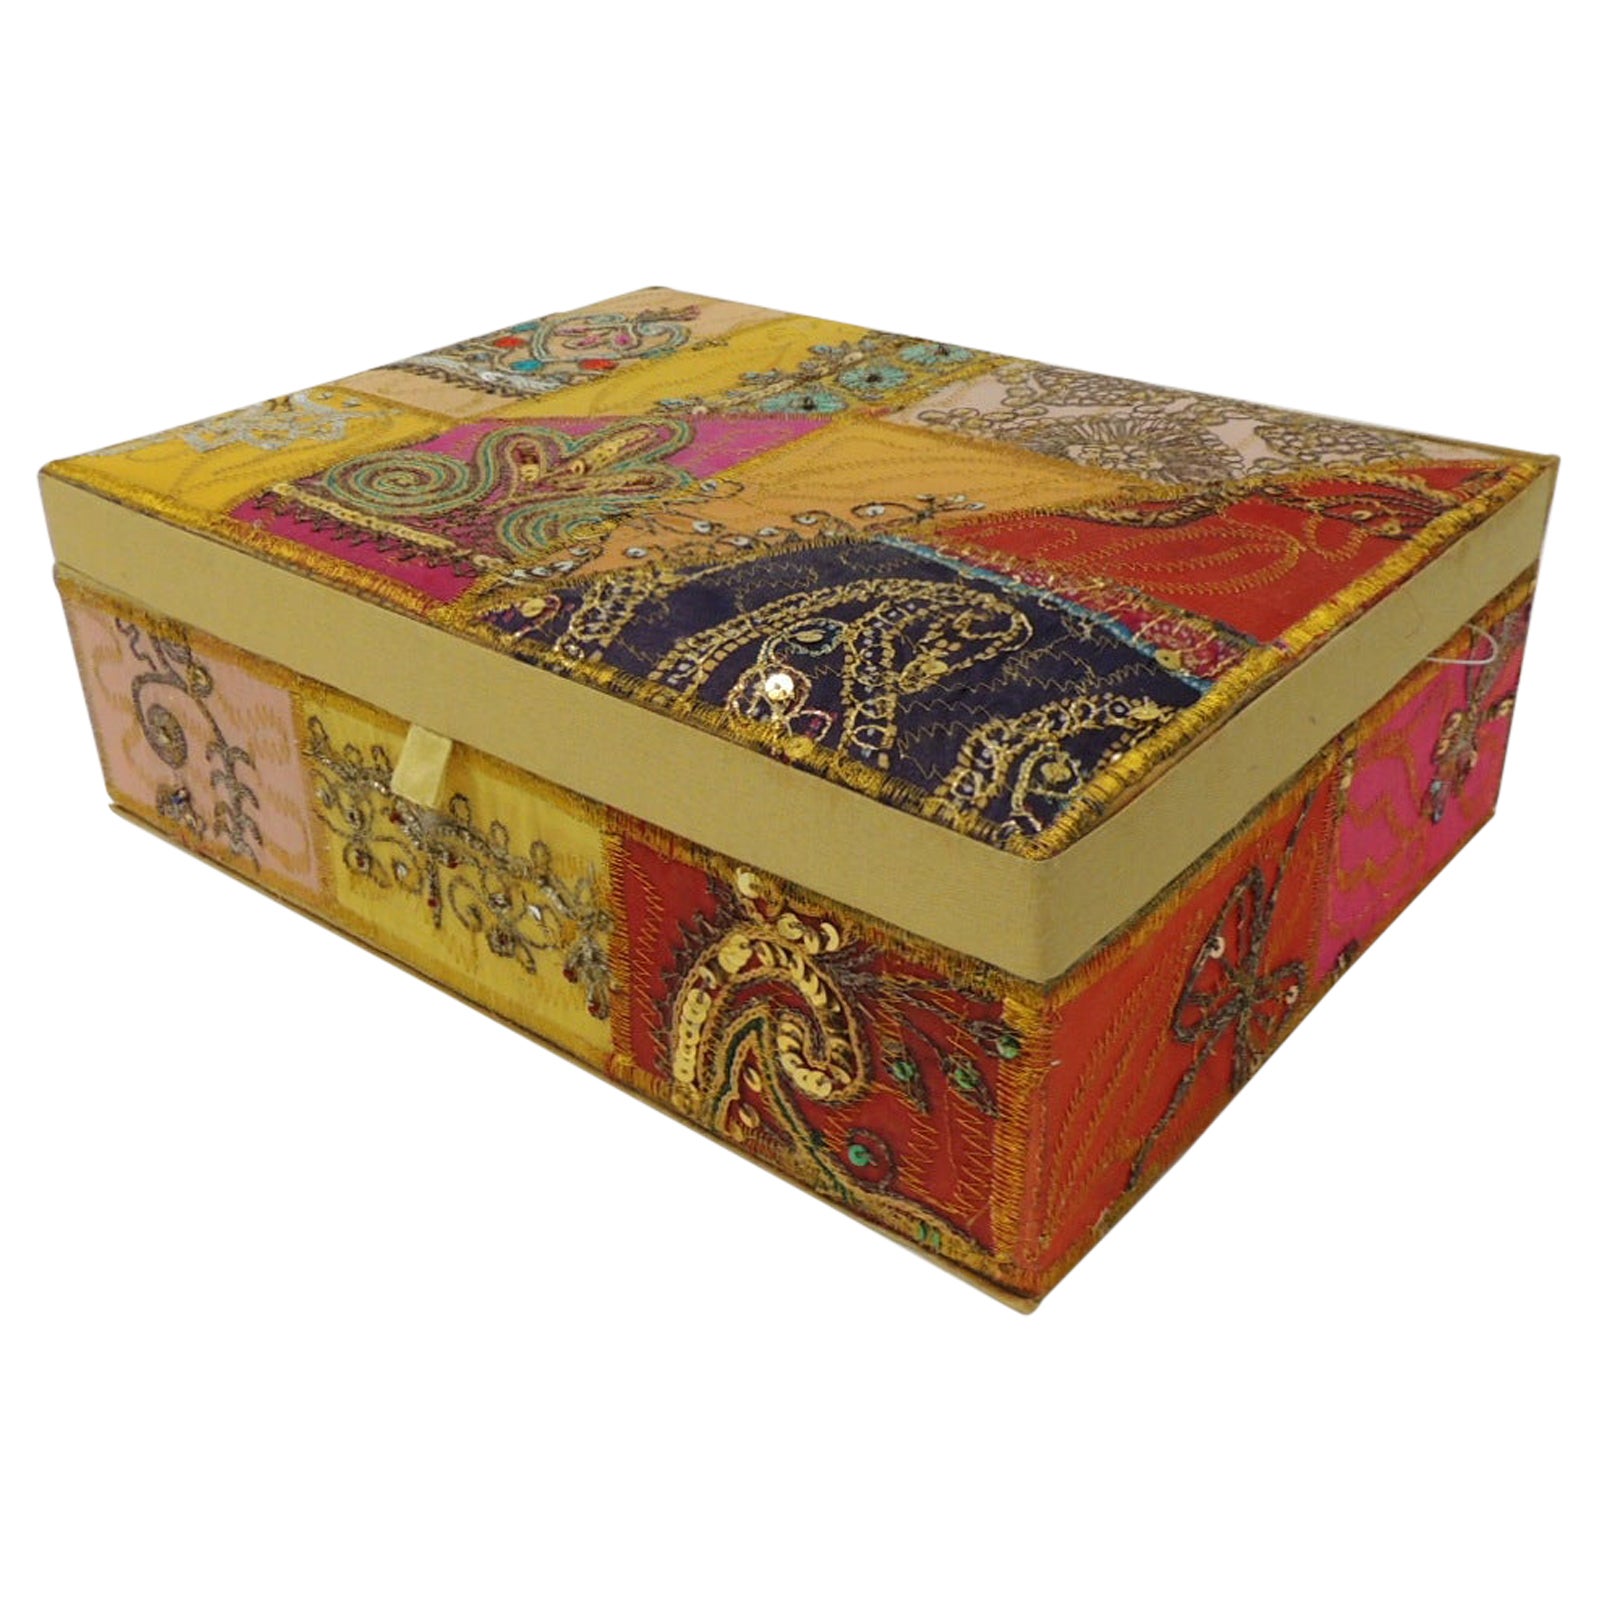 Colorful Embroidered Textile Indian Decorative Box